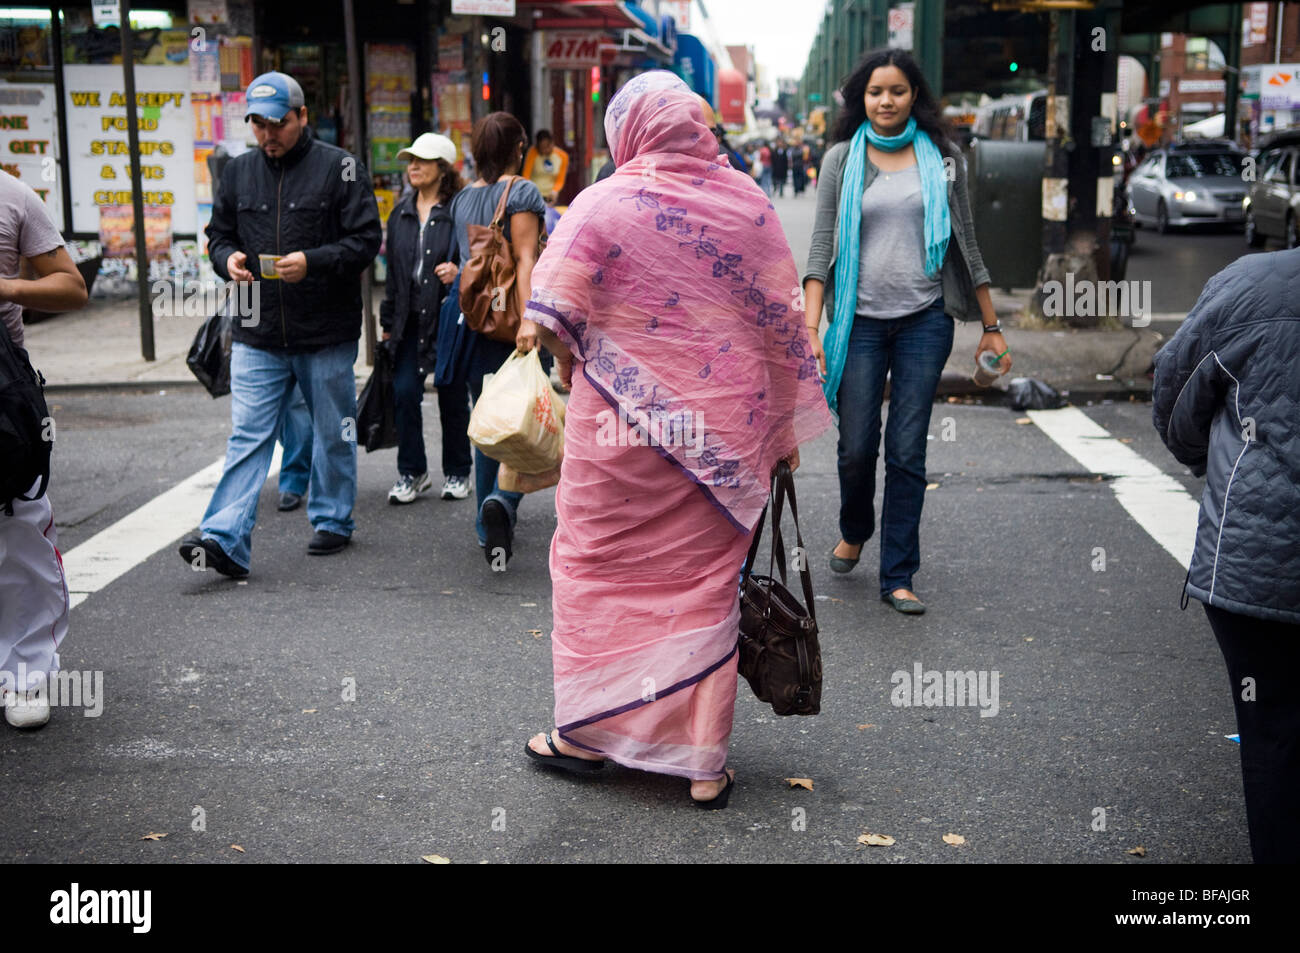 A woman in a sari and head covering crosses the street in the Queens neighborhood of Jackson Heights in New York Stock Photo